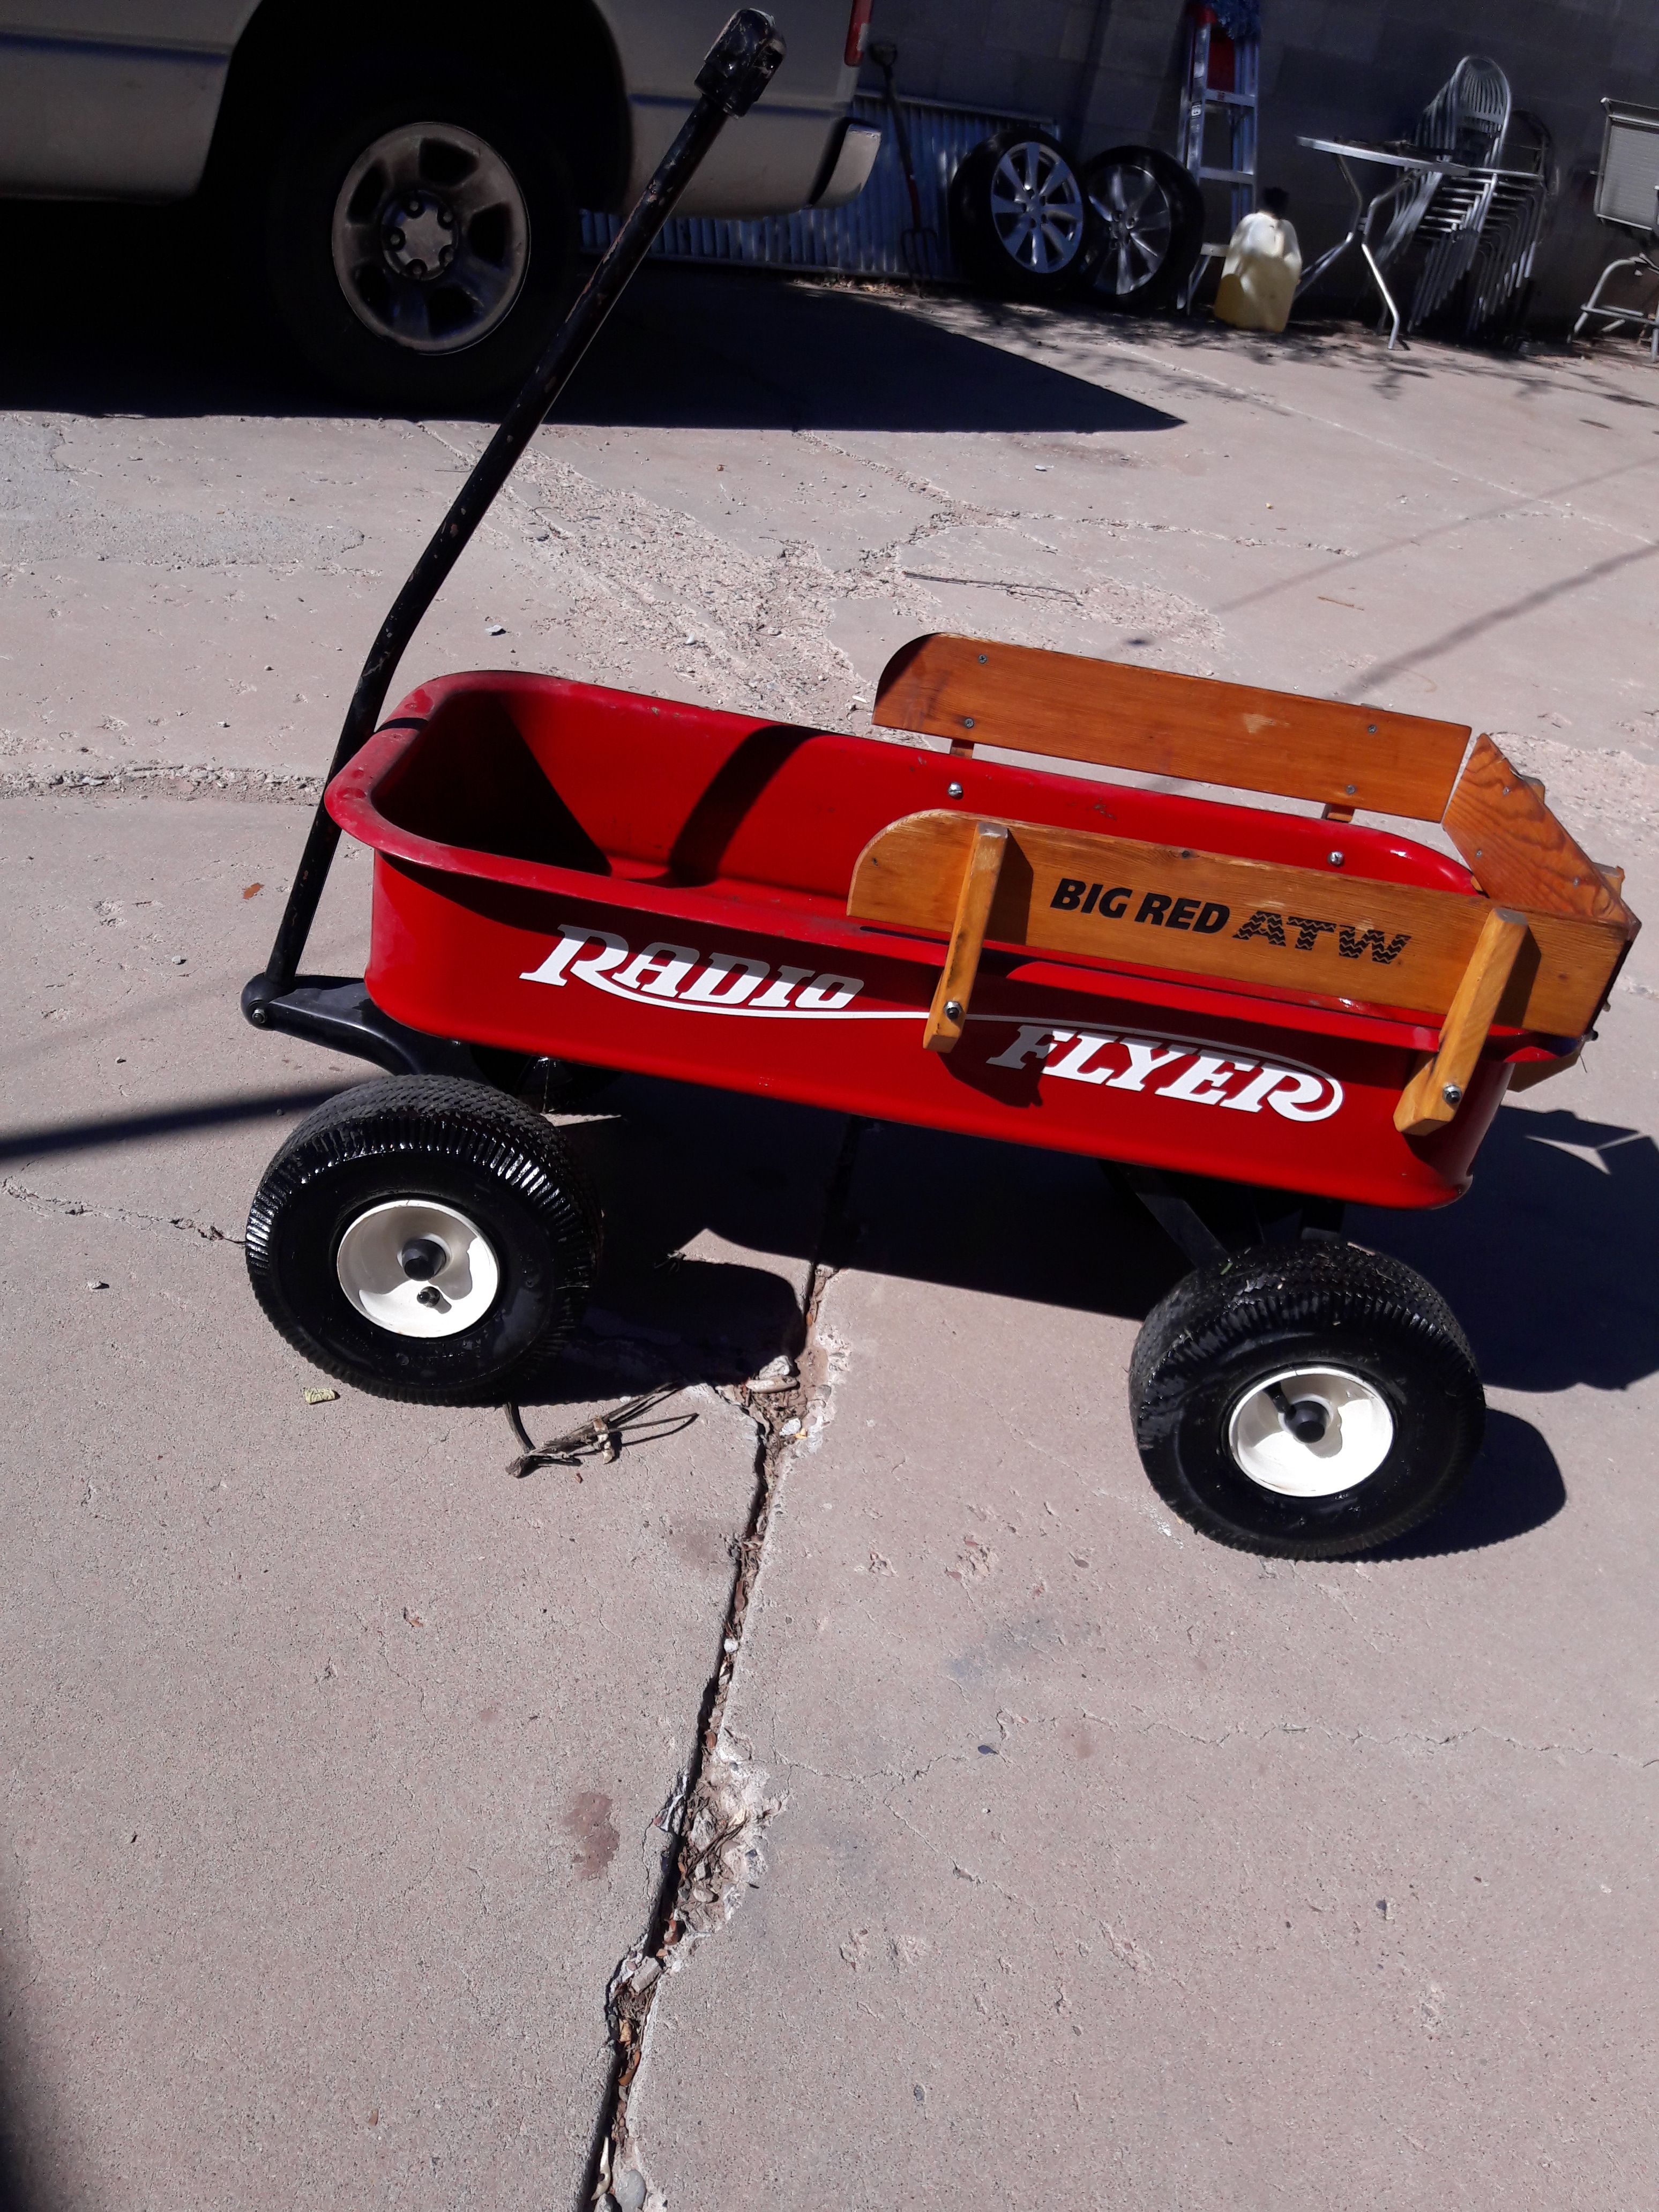 Big red ATW radio flyer wagon for Sale in Albuquerque, NM   OfferUp